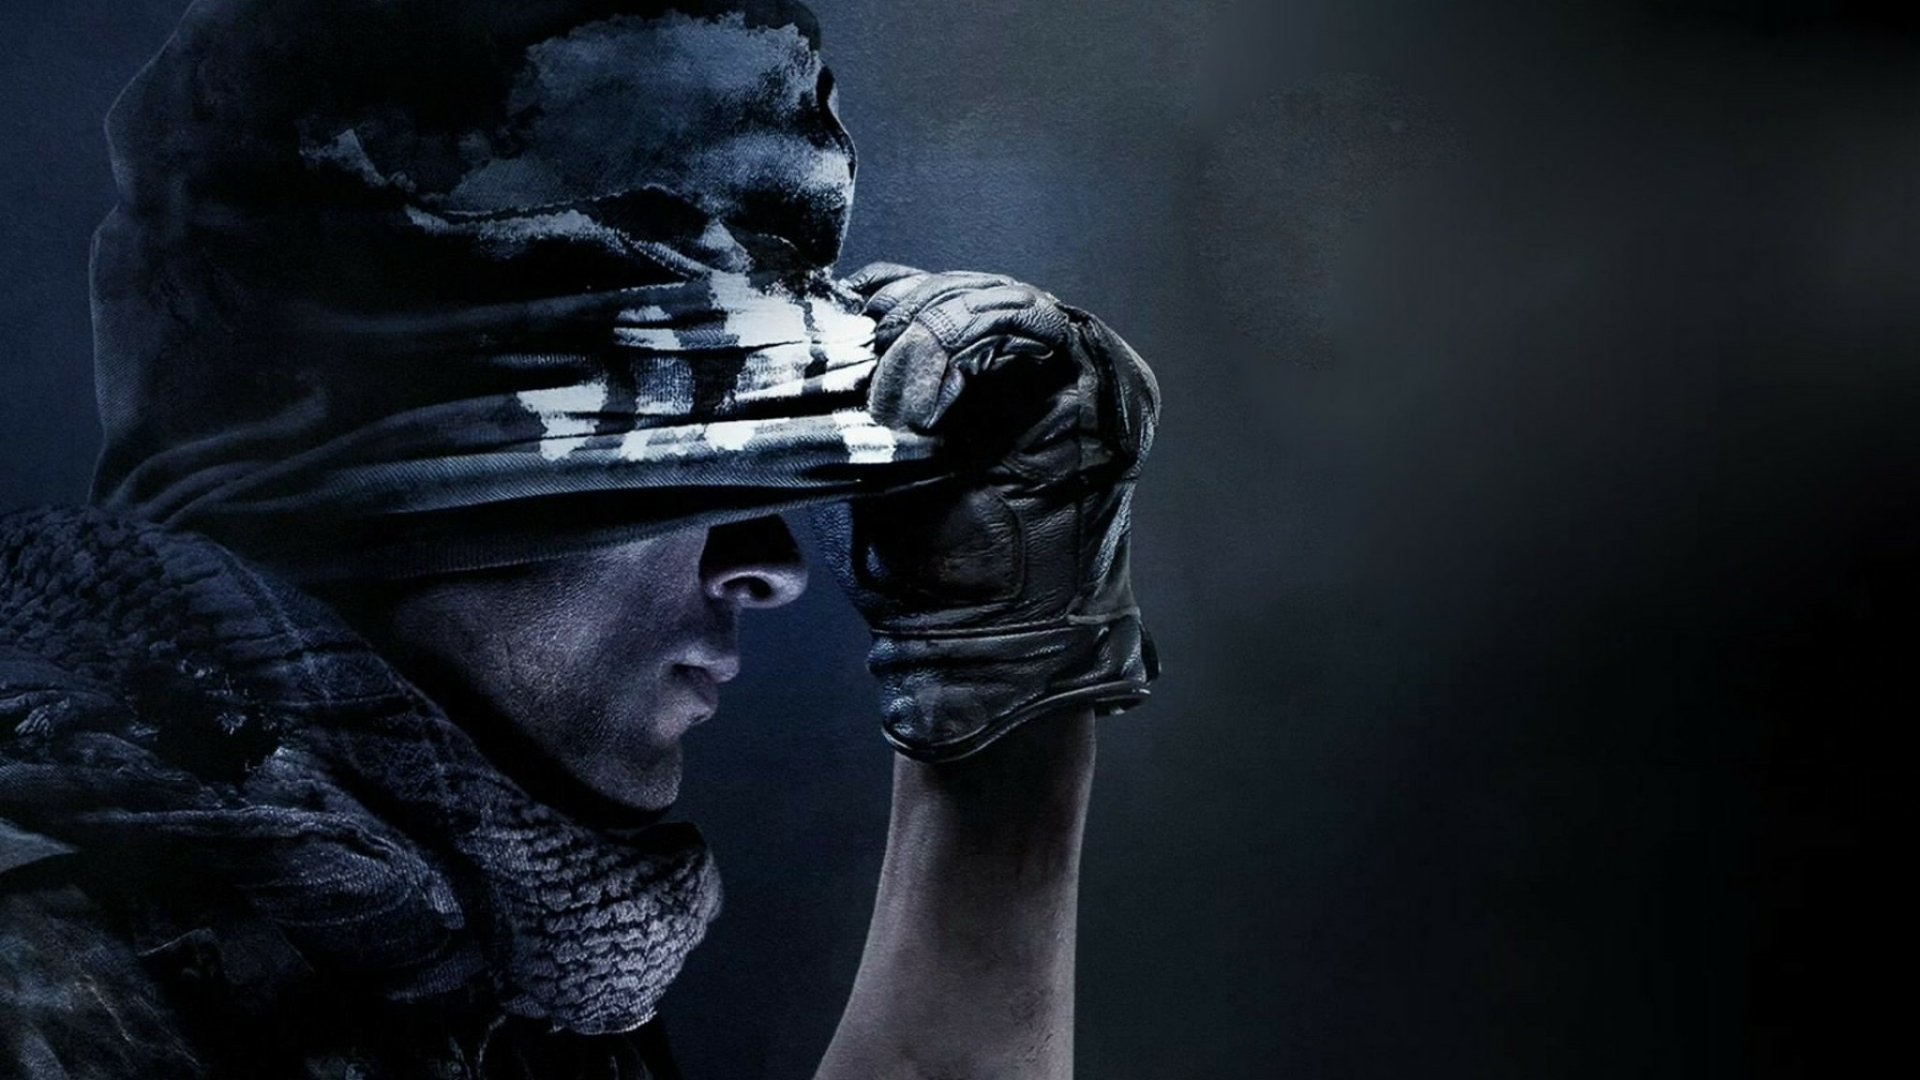 call of duty ghost wallpaper backgrounds